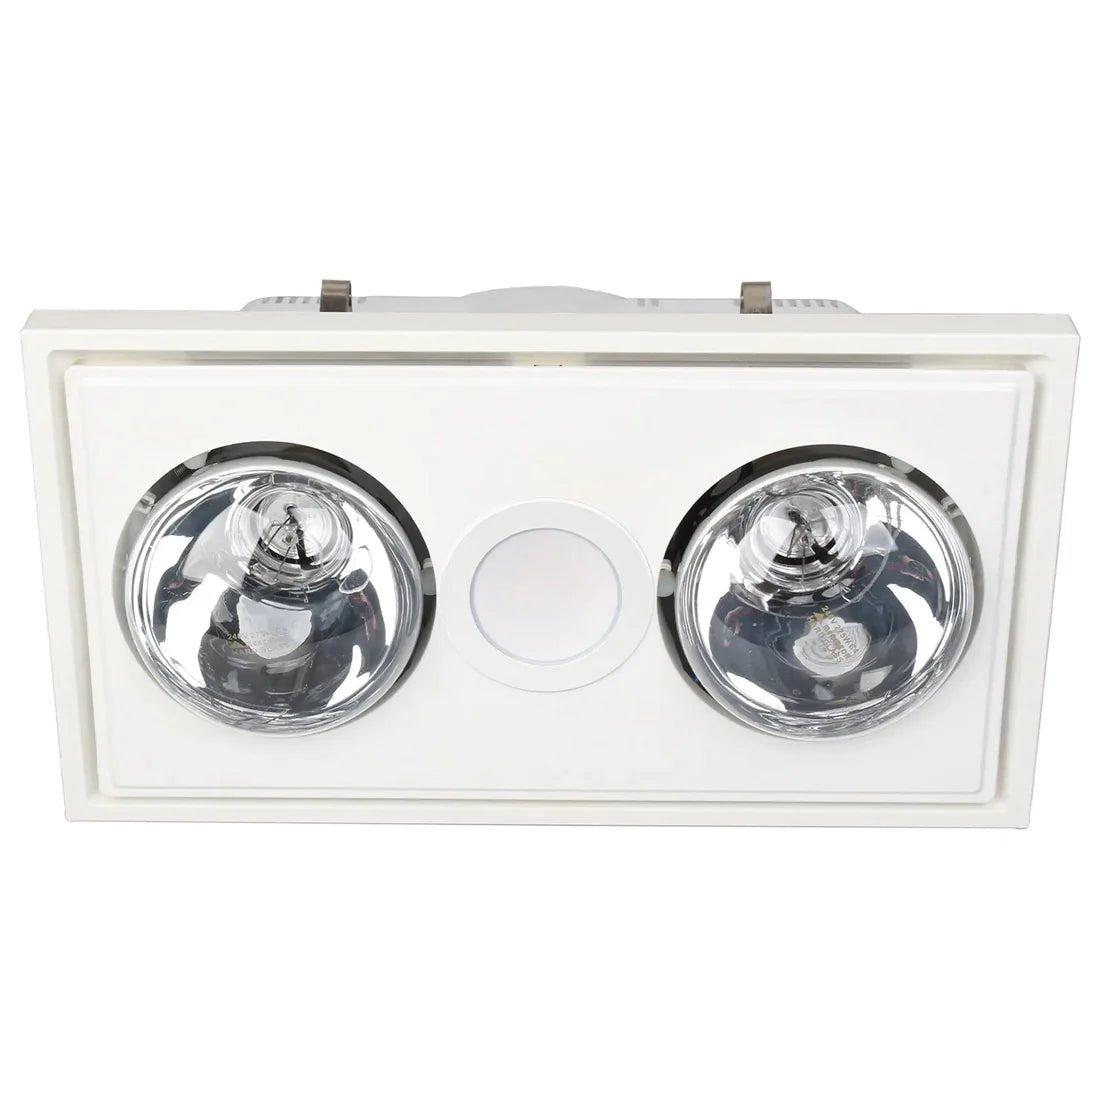 Mercator Midas Duo 3-In-1 Bathroom Heater With Exhaust Fan And LED Light - Mases LightingMercator